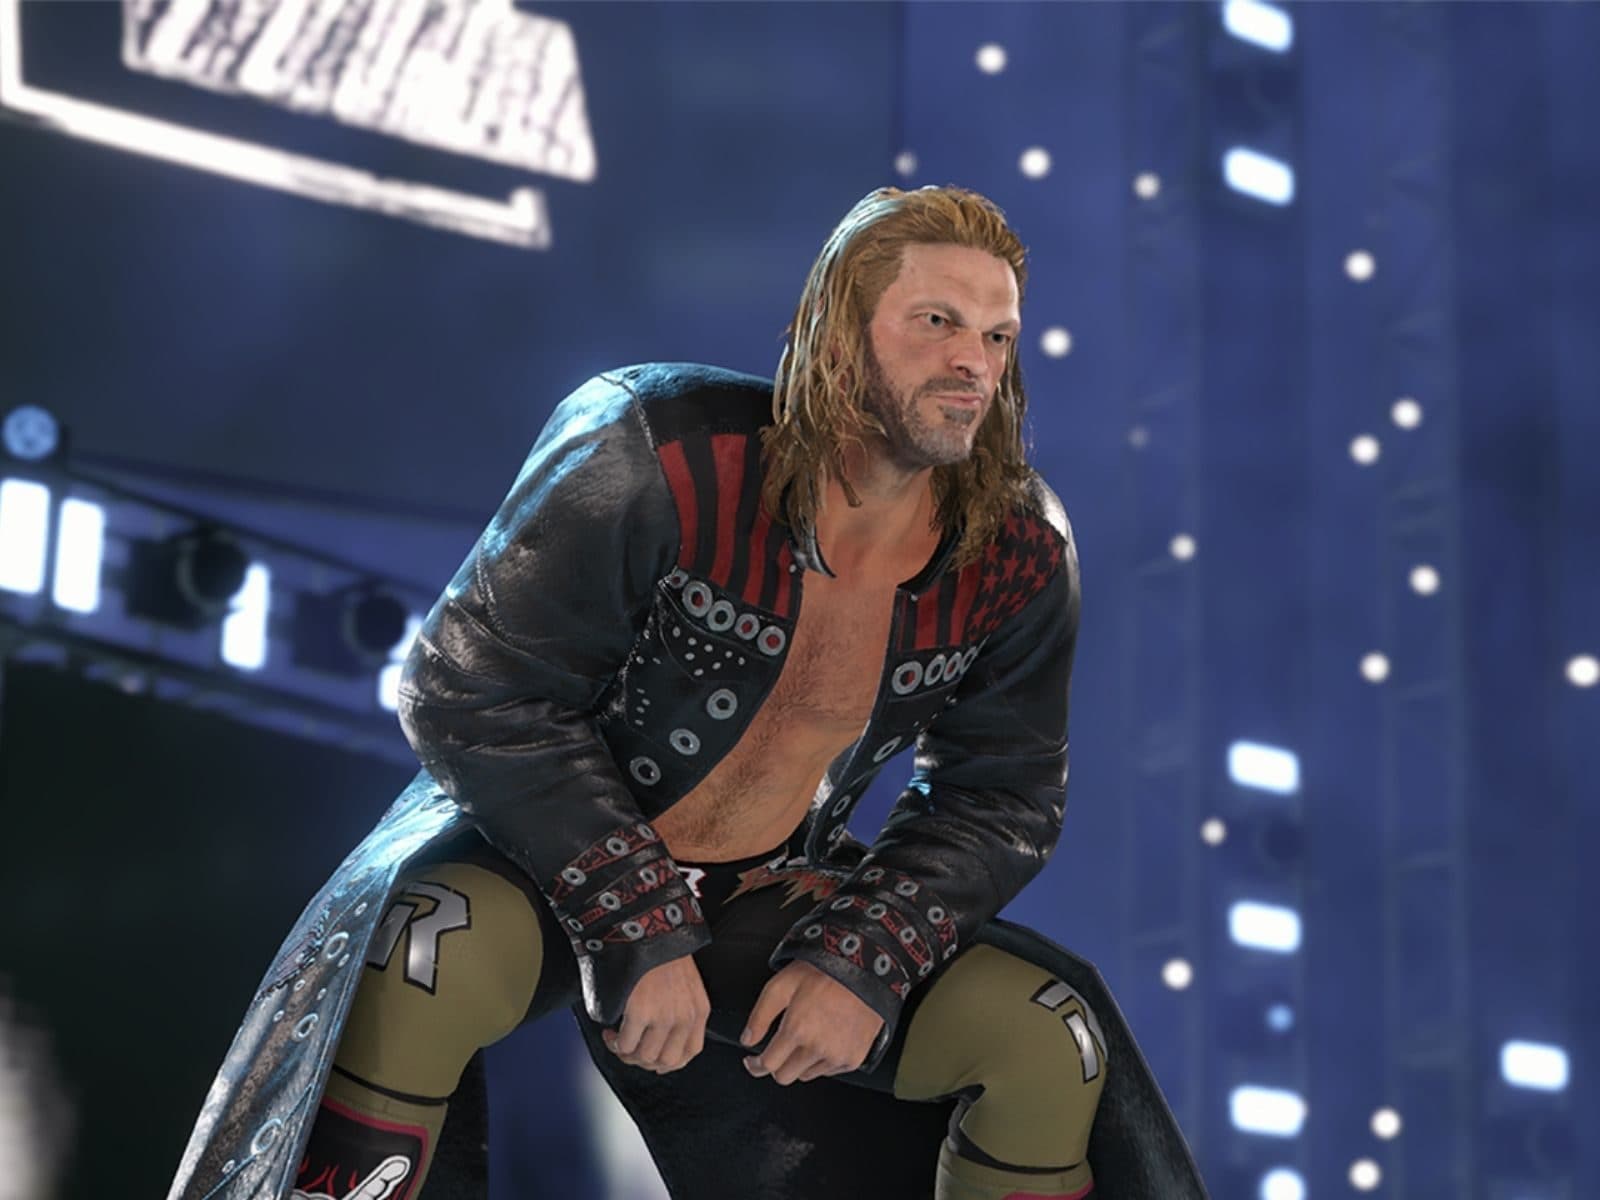 Wwe 2k22 Coming In March 22 Gameplay Trailer Shows Improved Graphics New Controls More